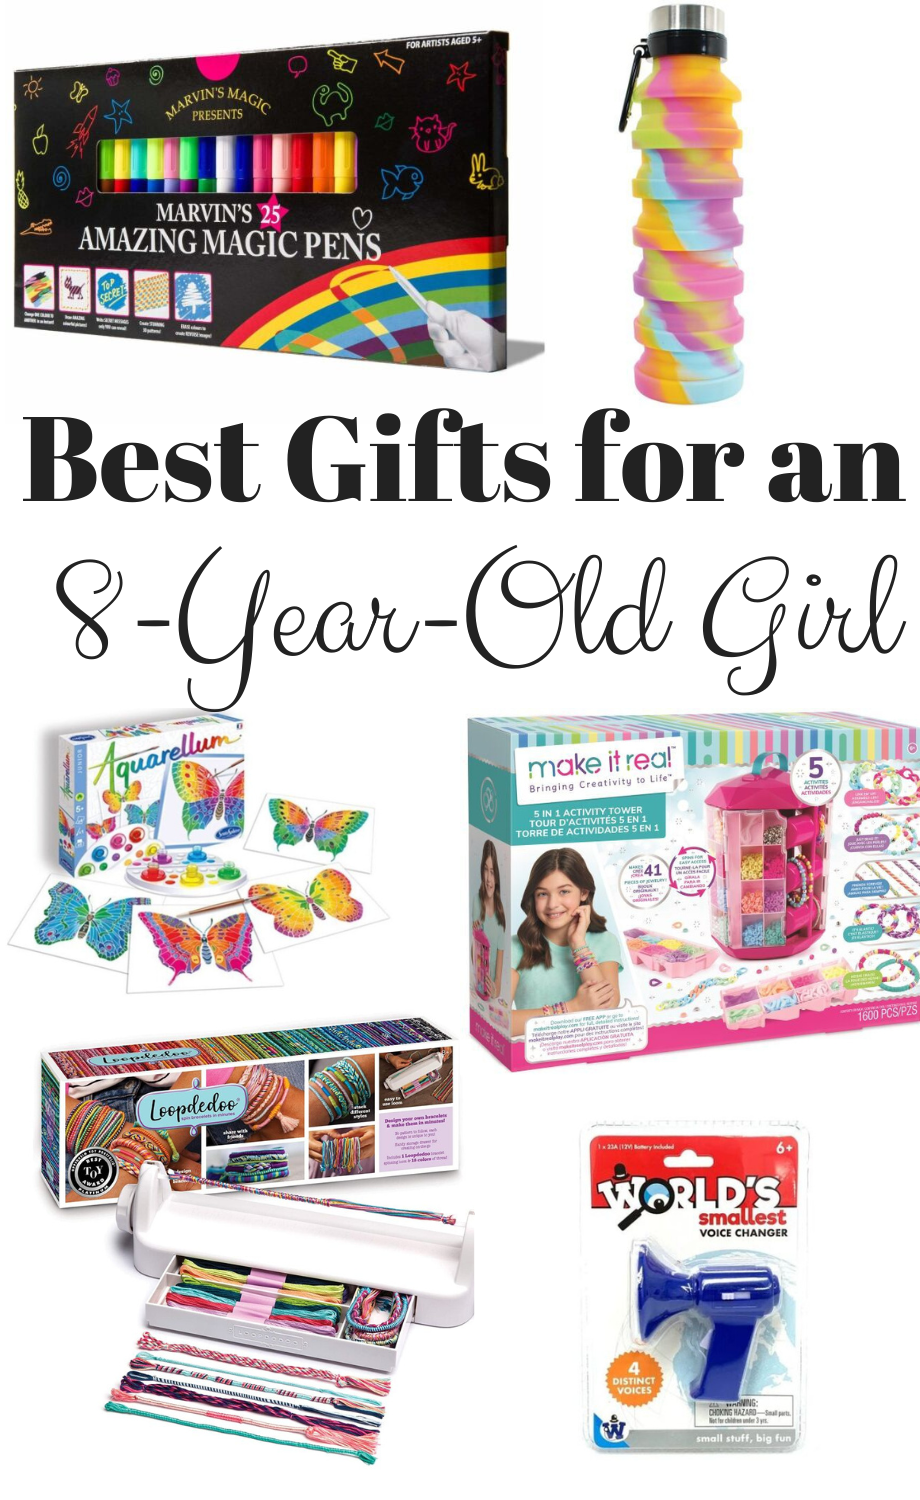 Best Gifts for an 8-Year-Old Girl